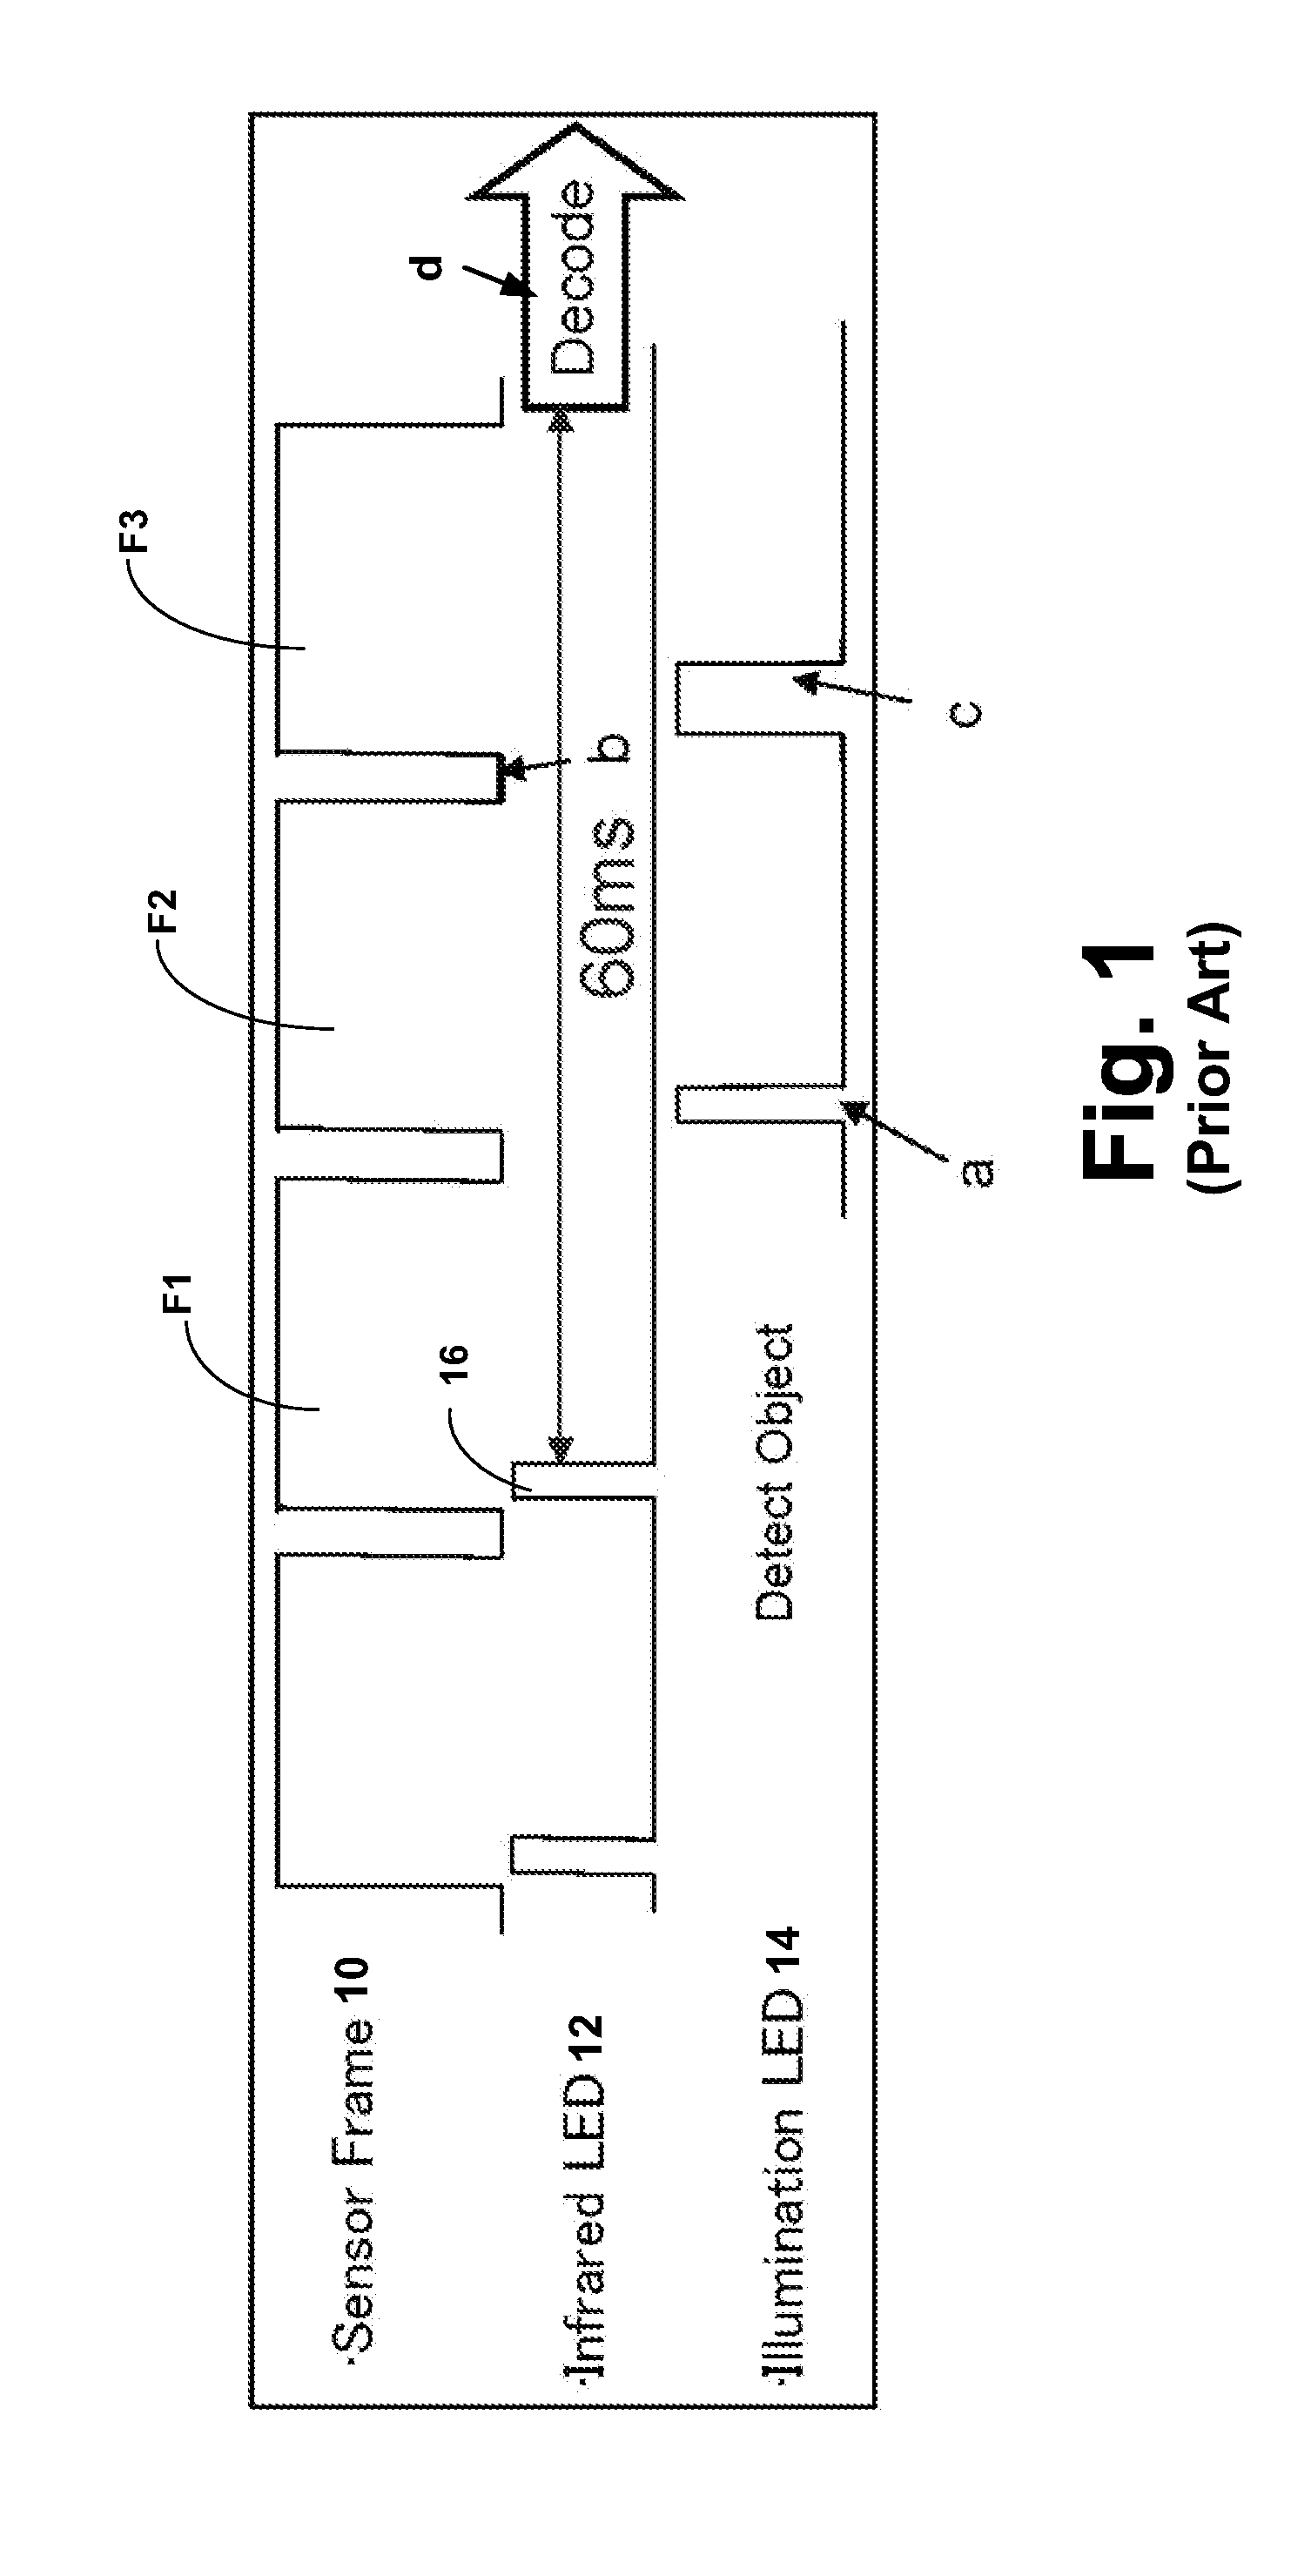 Optical Code Detection With Image Exposure Control